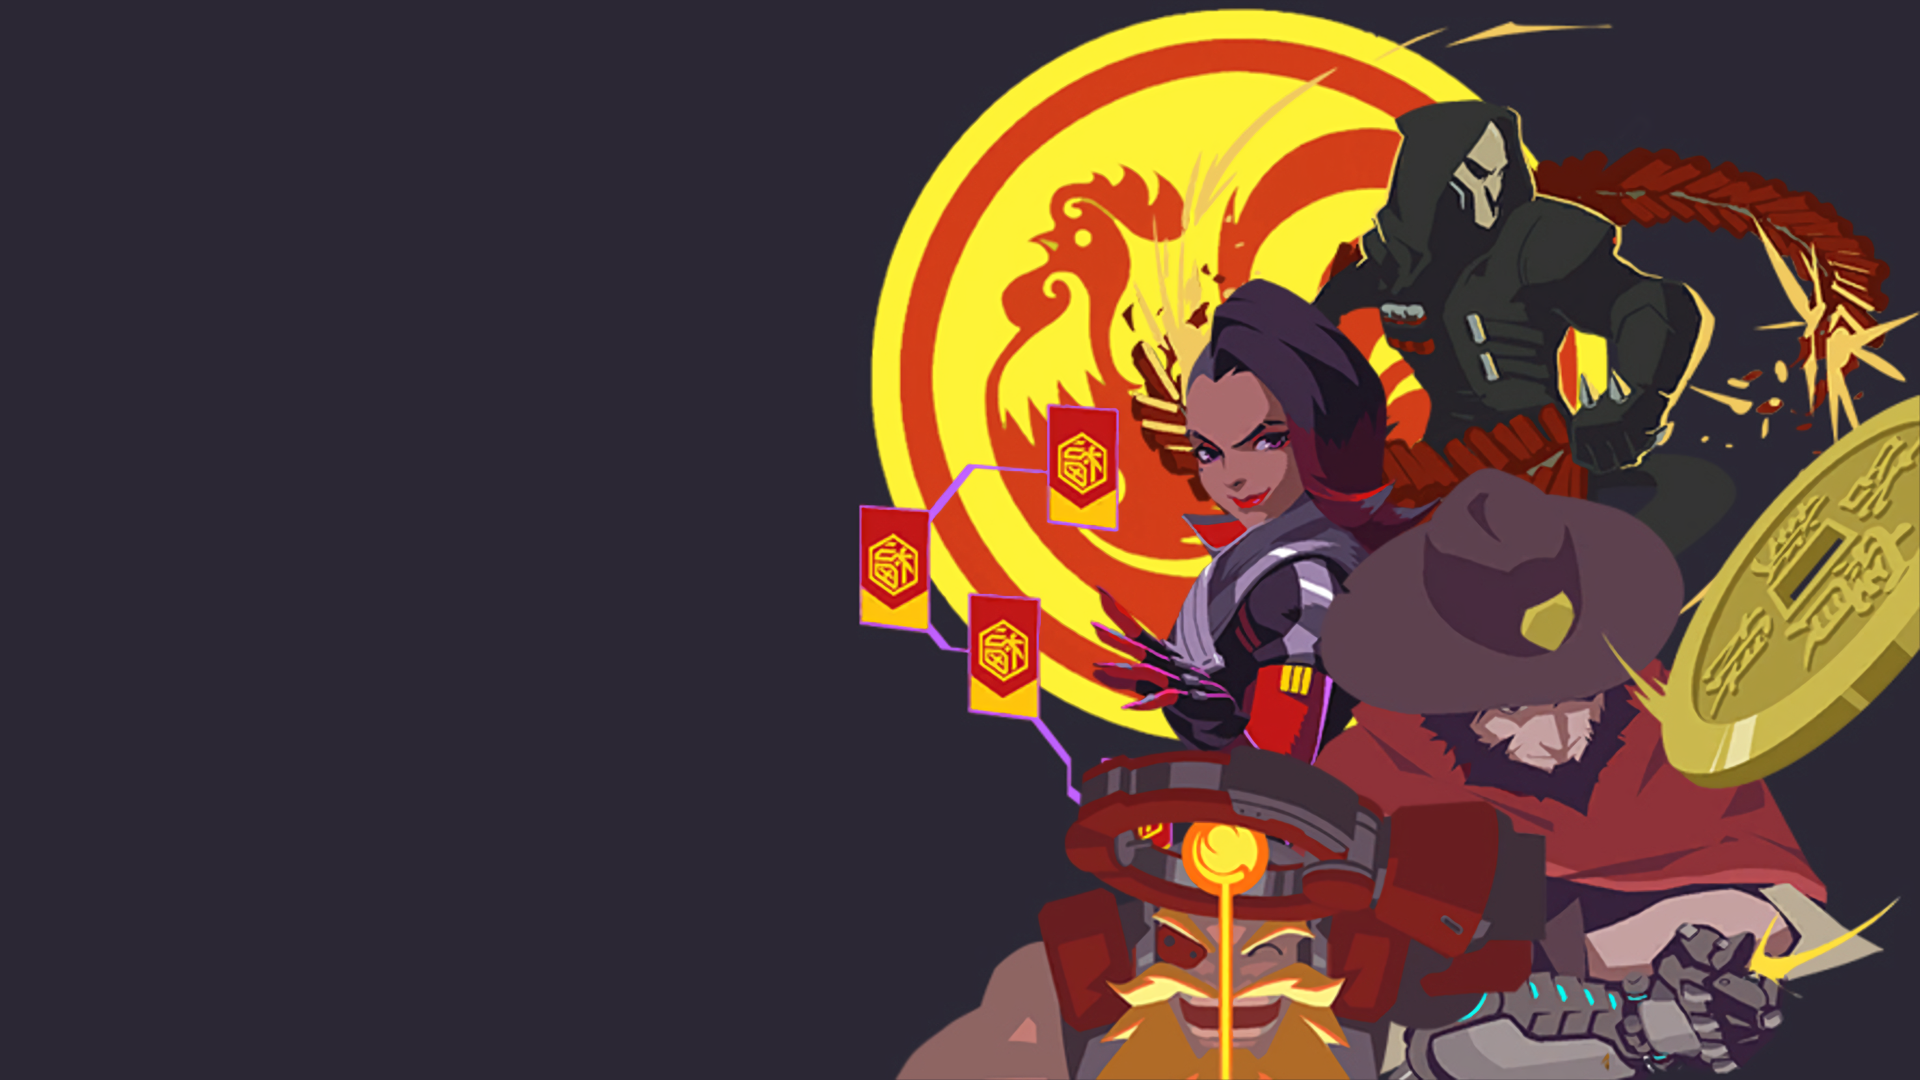 General 1920x1080 Overwatch Reaper (Overwatch) McRee (Overwatch) Sombra (Overwatch) Torbjörn (Overwatch) video game characters simple background digital art